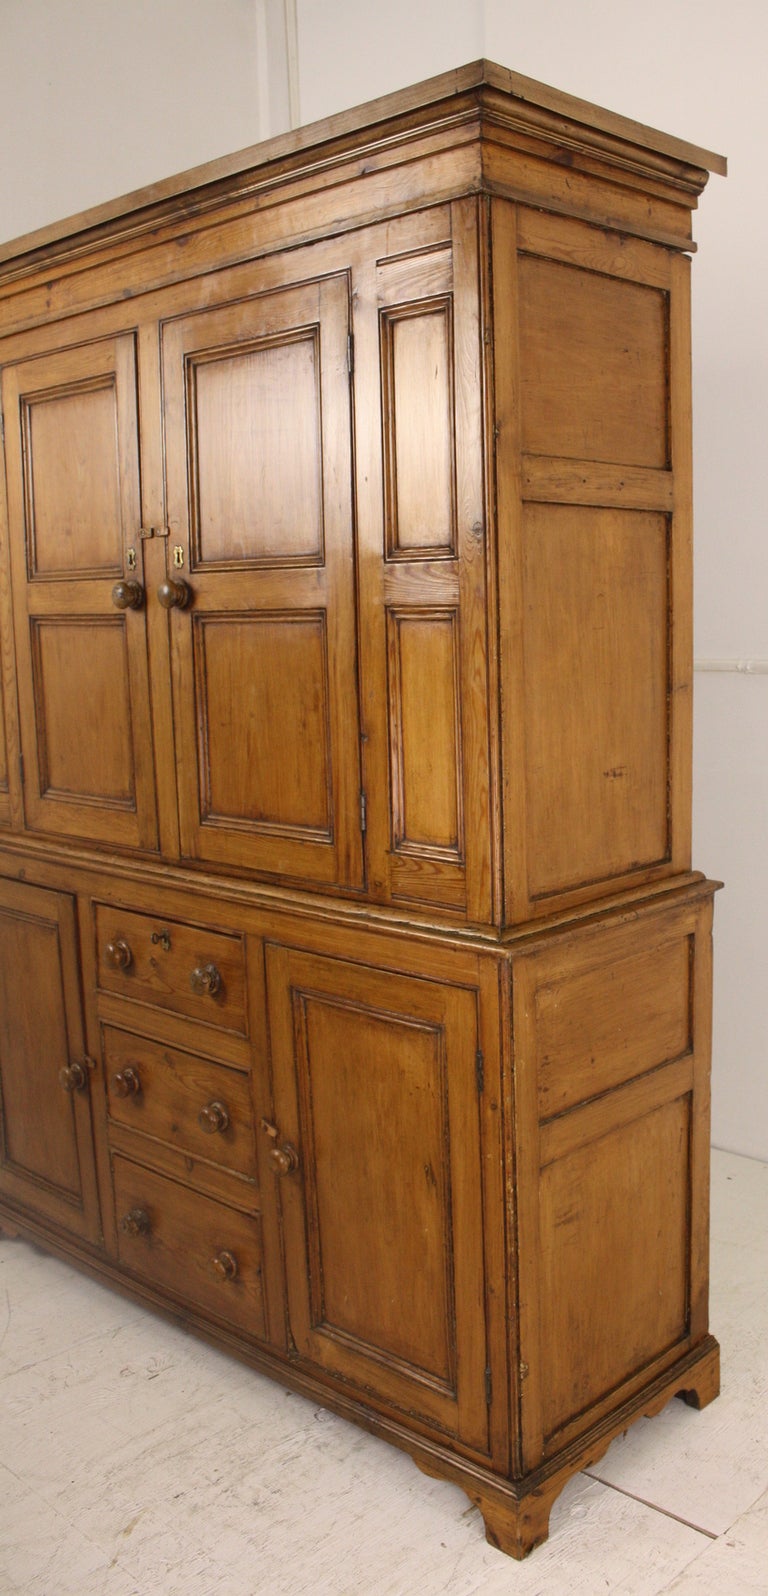 Period West Country Antique English Housekeeper's Cupboard 4